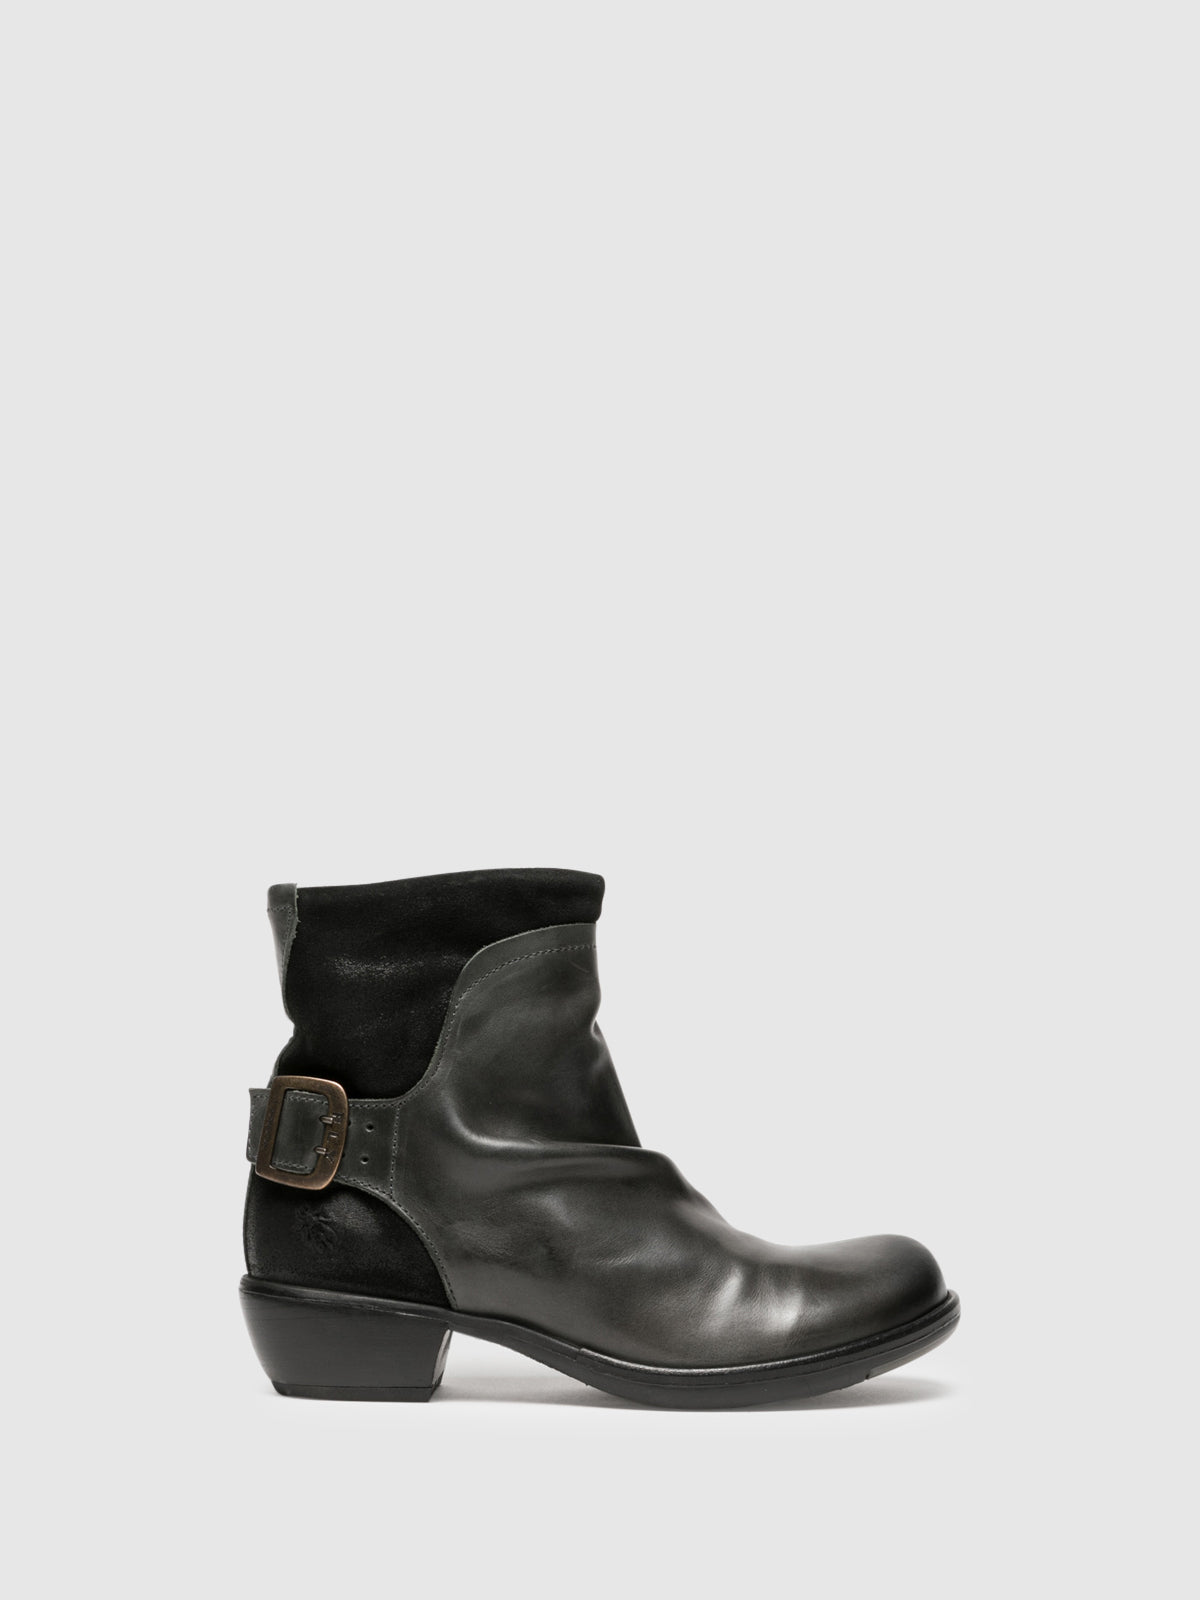 Fly London Gray Buckle Ankle Boots